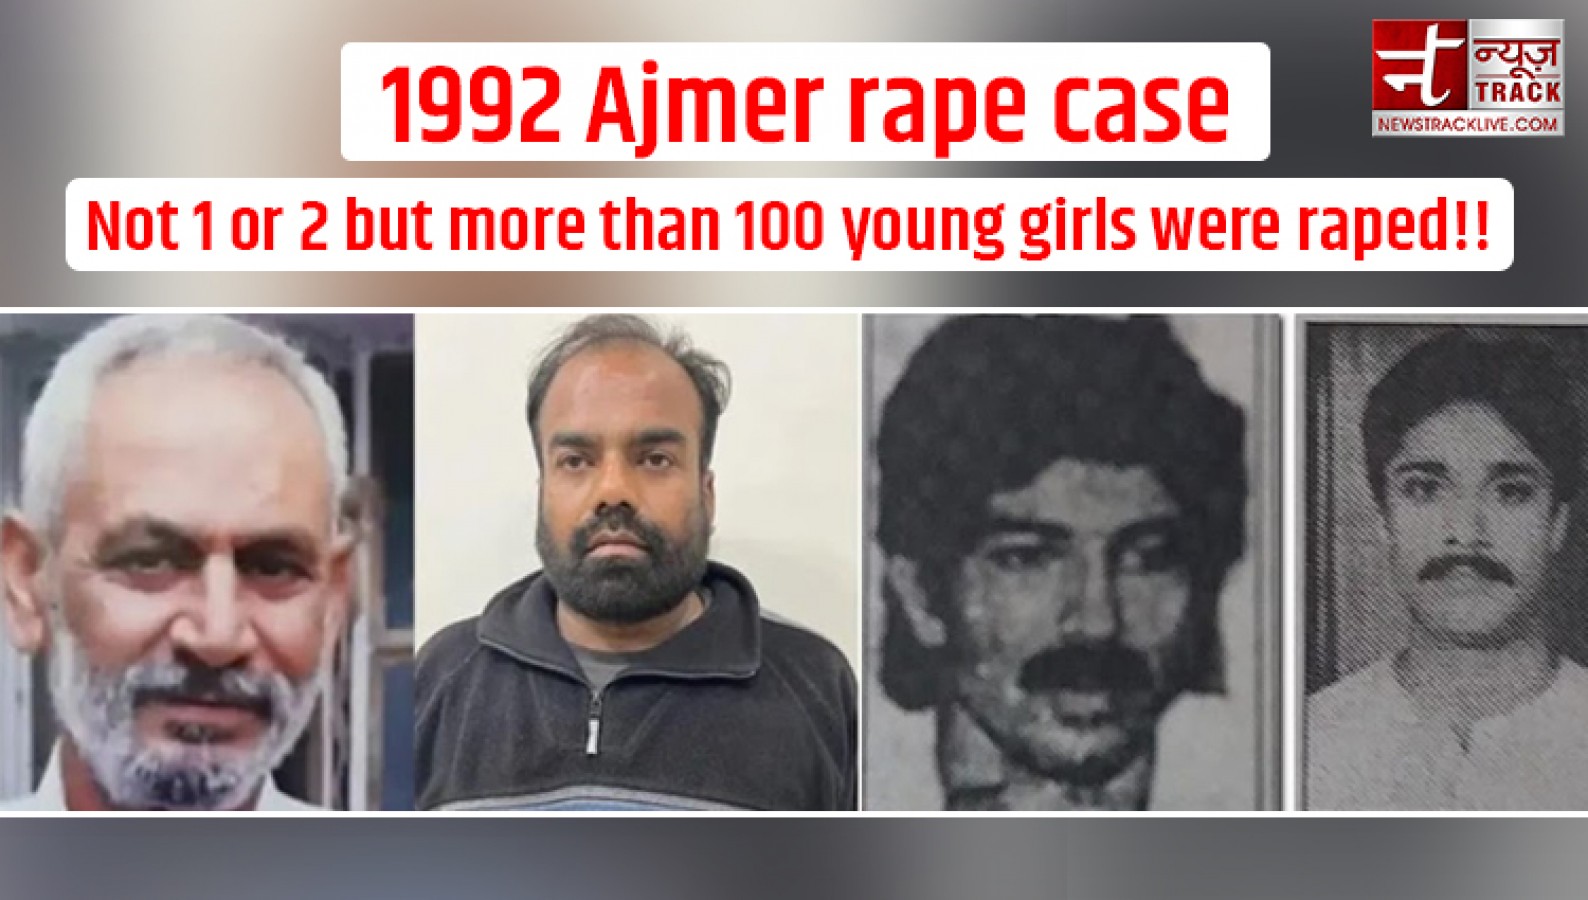 Ajmer Ka Sex - Ajmer sex scandal: Over 100 girls were raped brutally, one of main accused  shot dead after 31 years | NewsTrack English 1